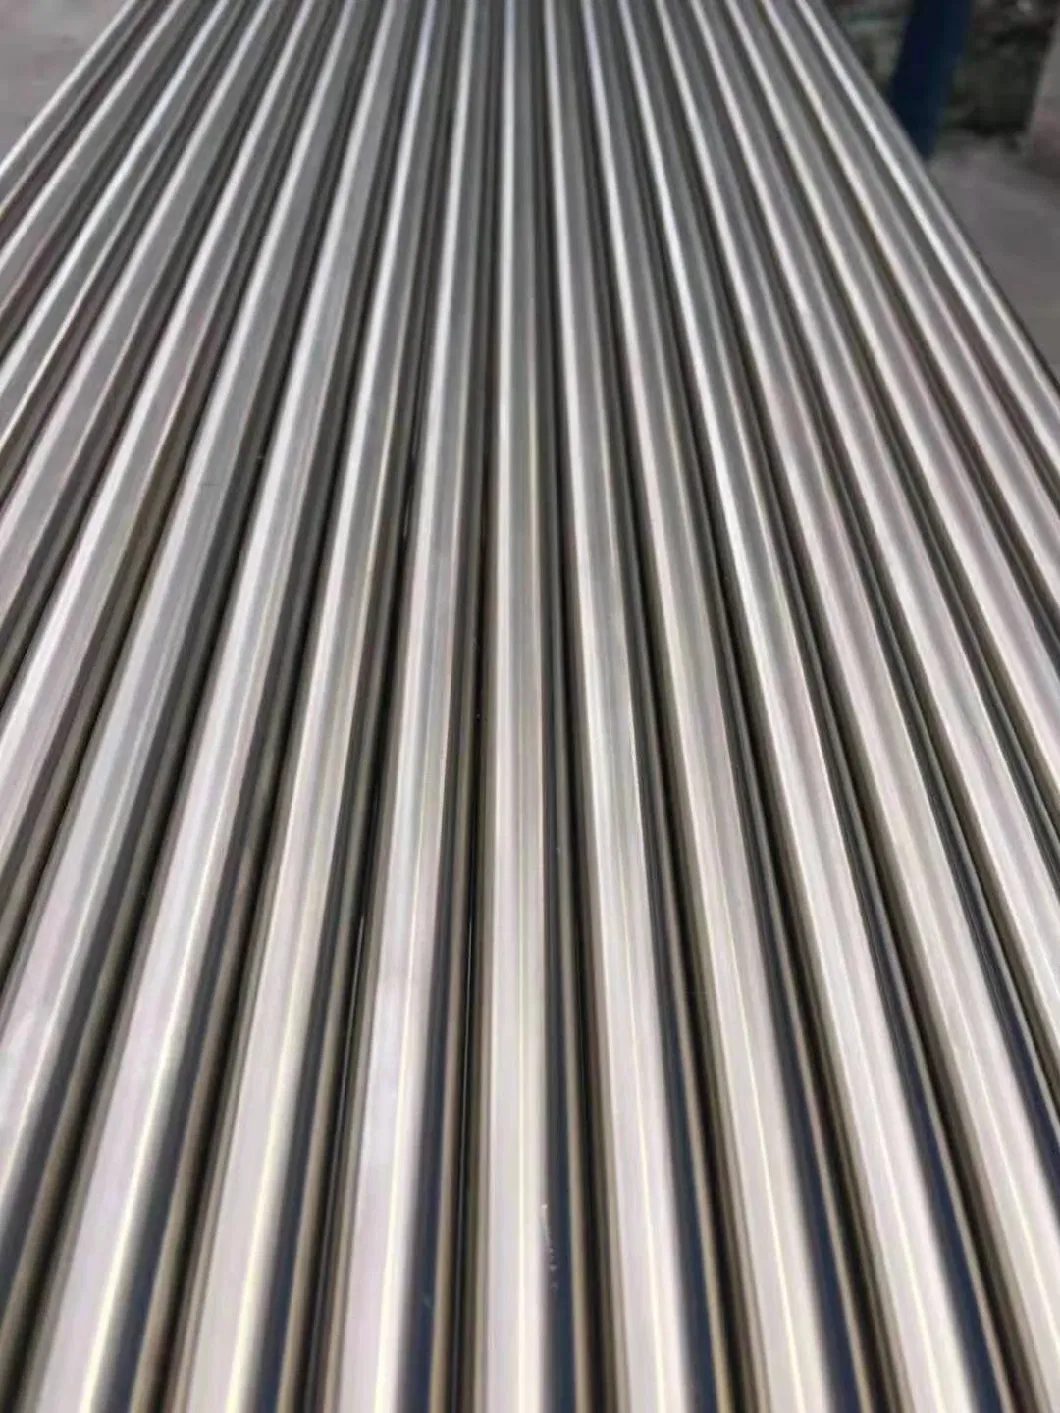 Type 630 Stainless Steel Rod SUS630 Stainless Steel Bar